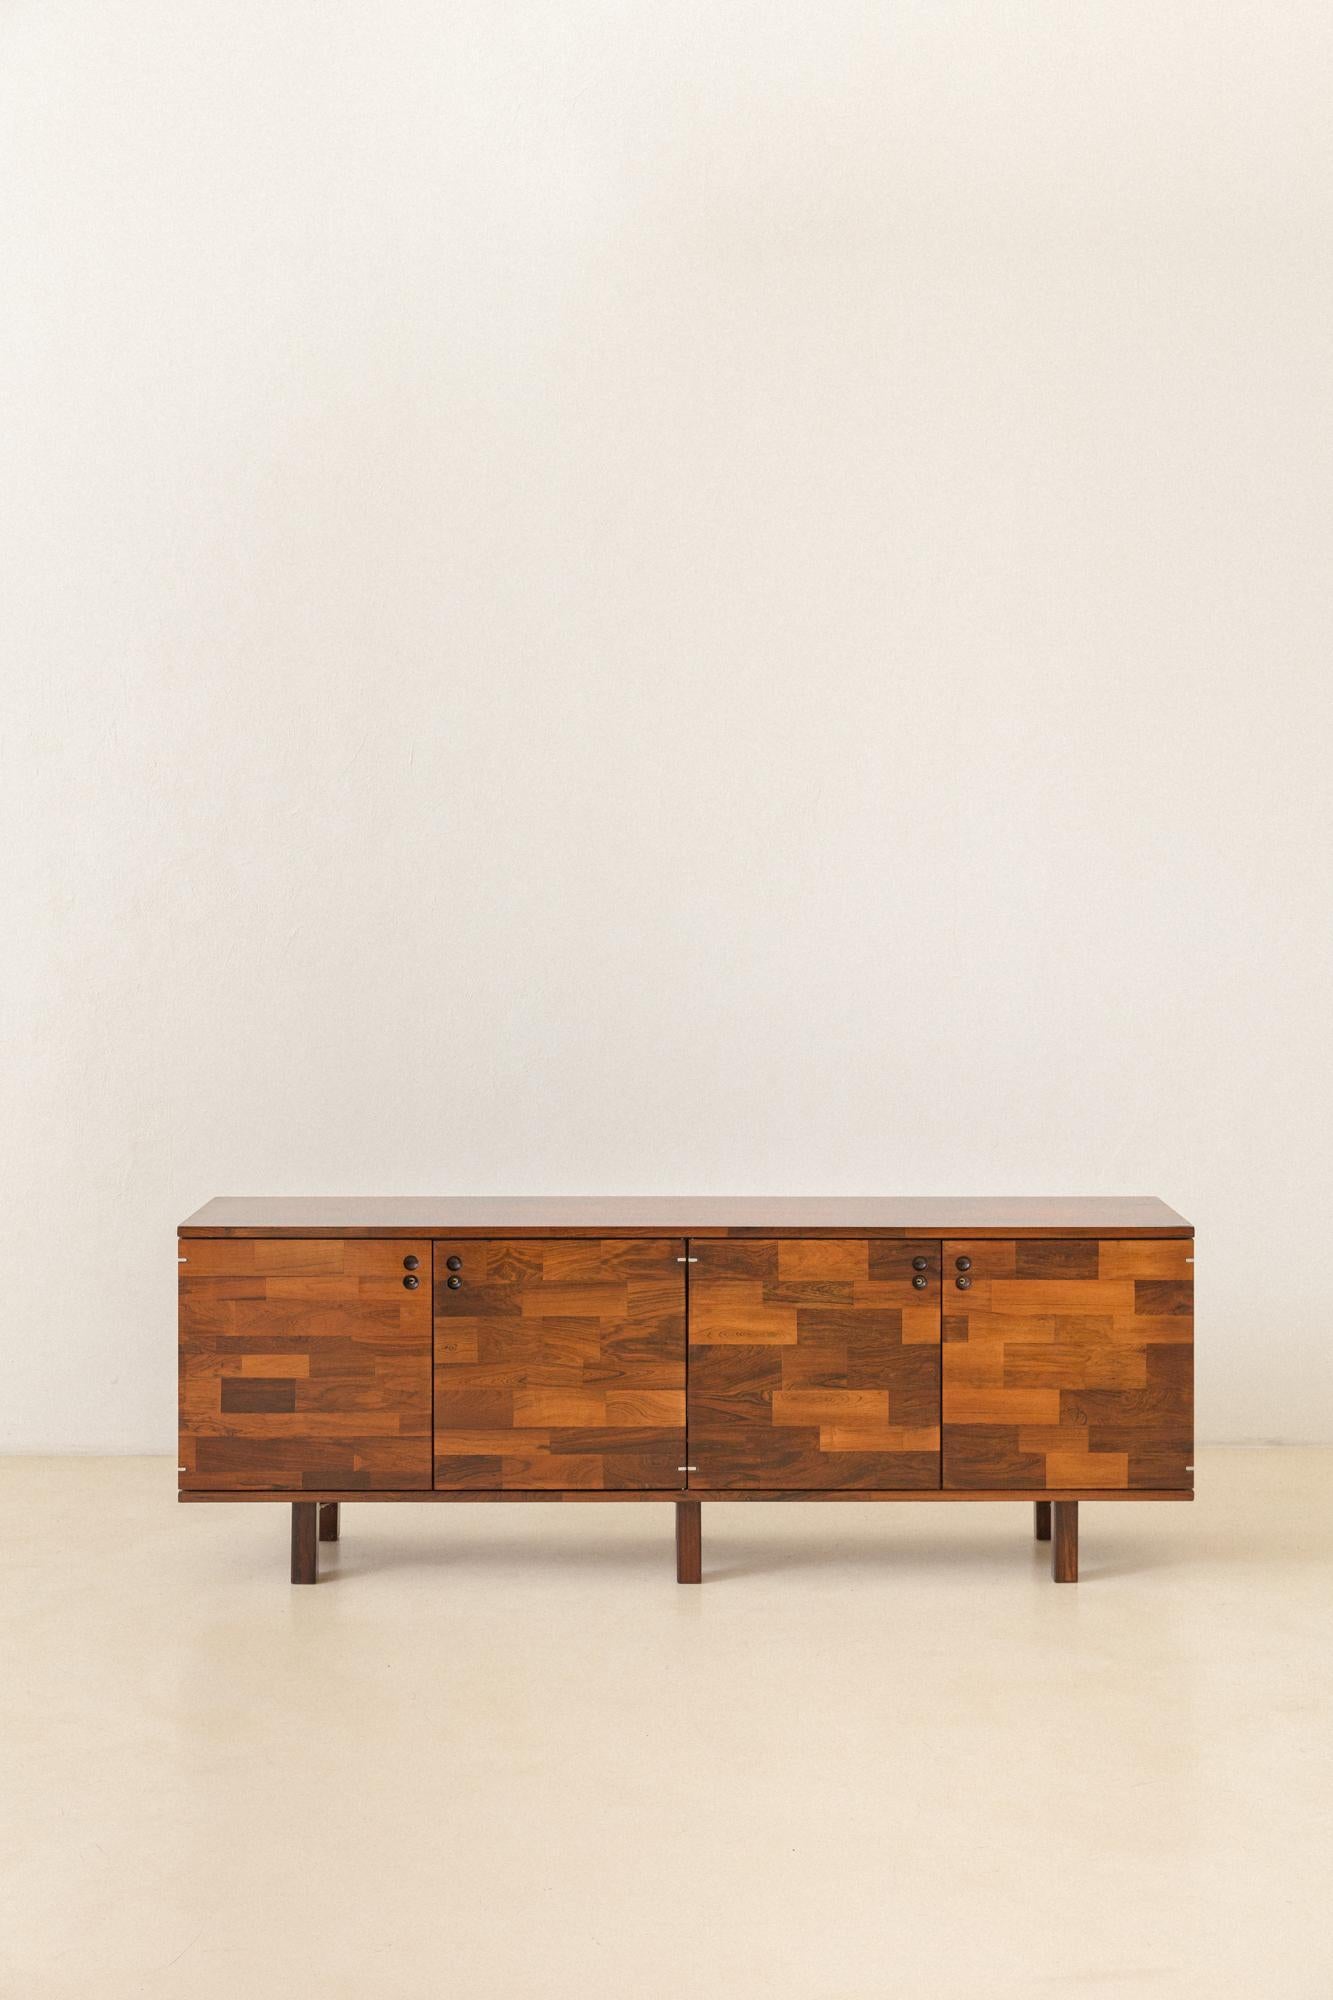 

This Rosewood Credenza, designed by Jorge Zalszupin (1922-2020) and manufactured by L'Atelier in the 1960s, is a great way to have the diversity of different tones of Rosewood in just one piece.

This credenza is part of a series with several